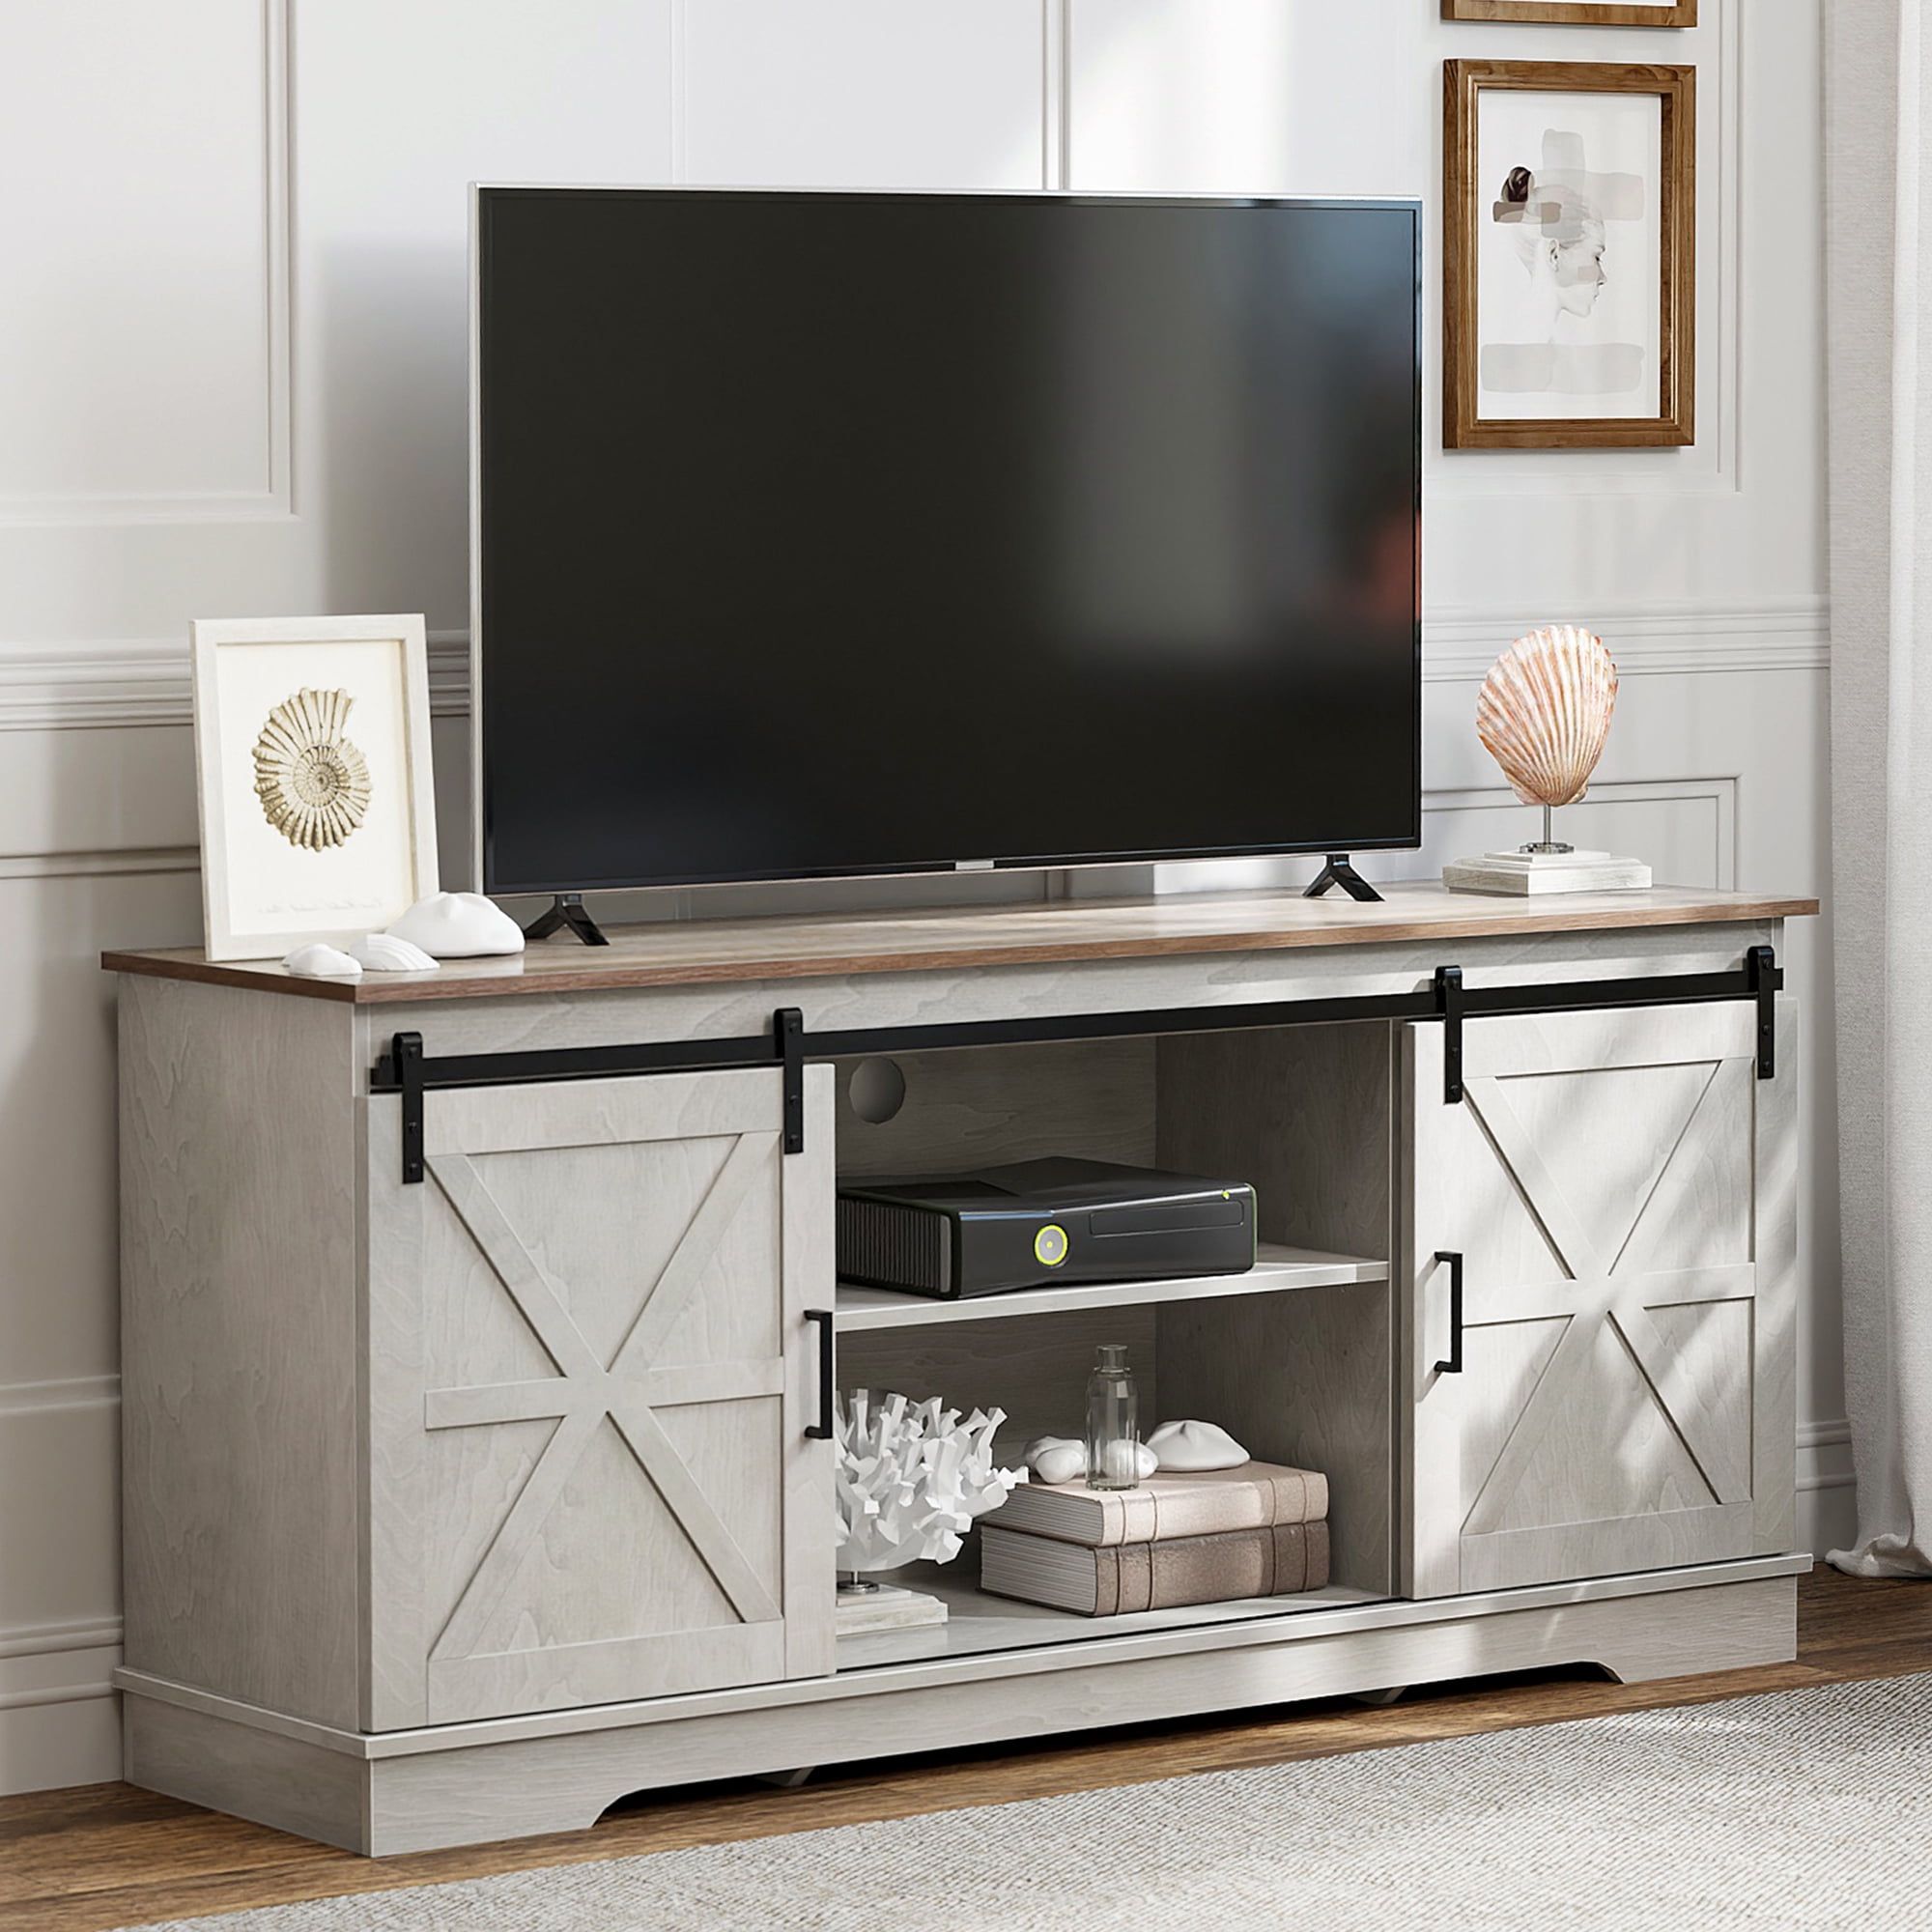 Dextrus Farmhouse Tv Stand For 65 Inch Tv, Entertainment Center For 300lbs  With Double Barn Doors, Tv Media Console, Grey Wash – Walmart Intended For Farmhouse Media Entertainment Centers (View 9 of 15)